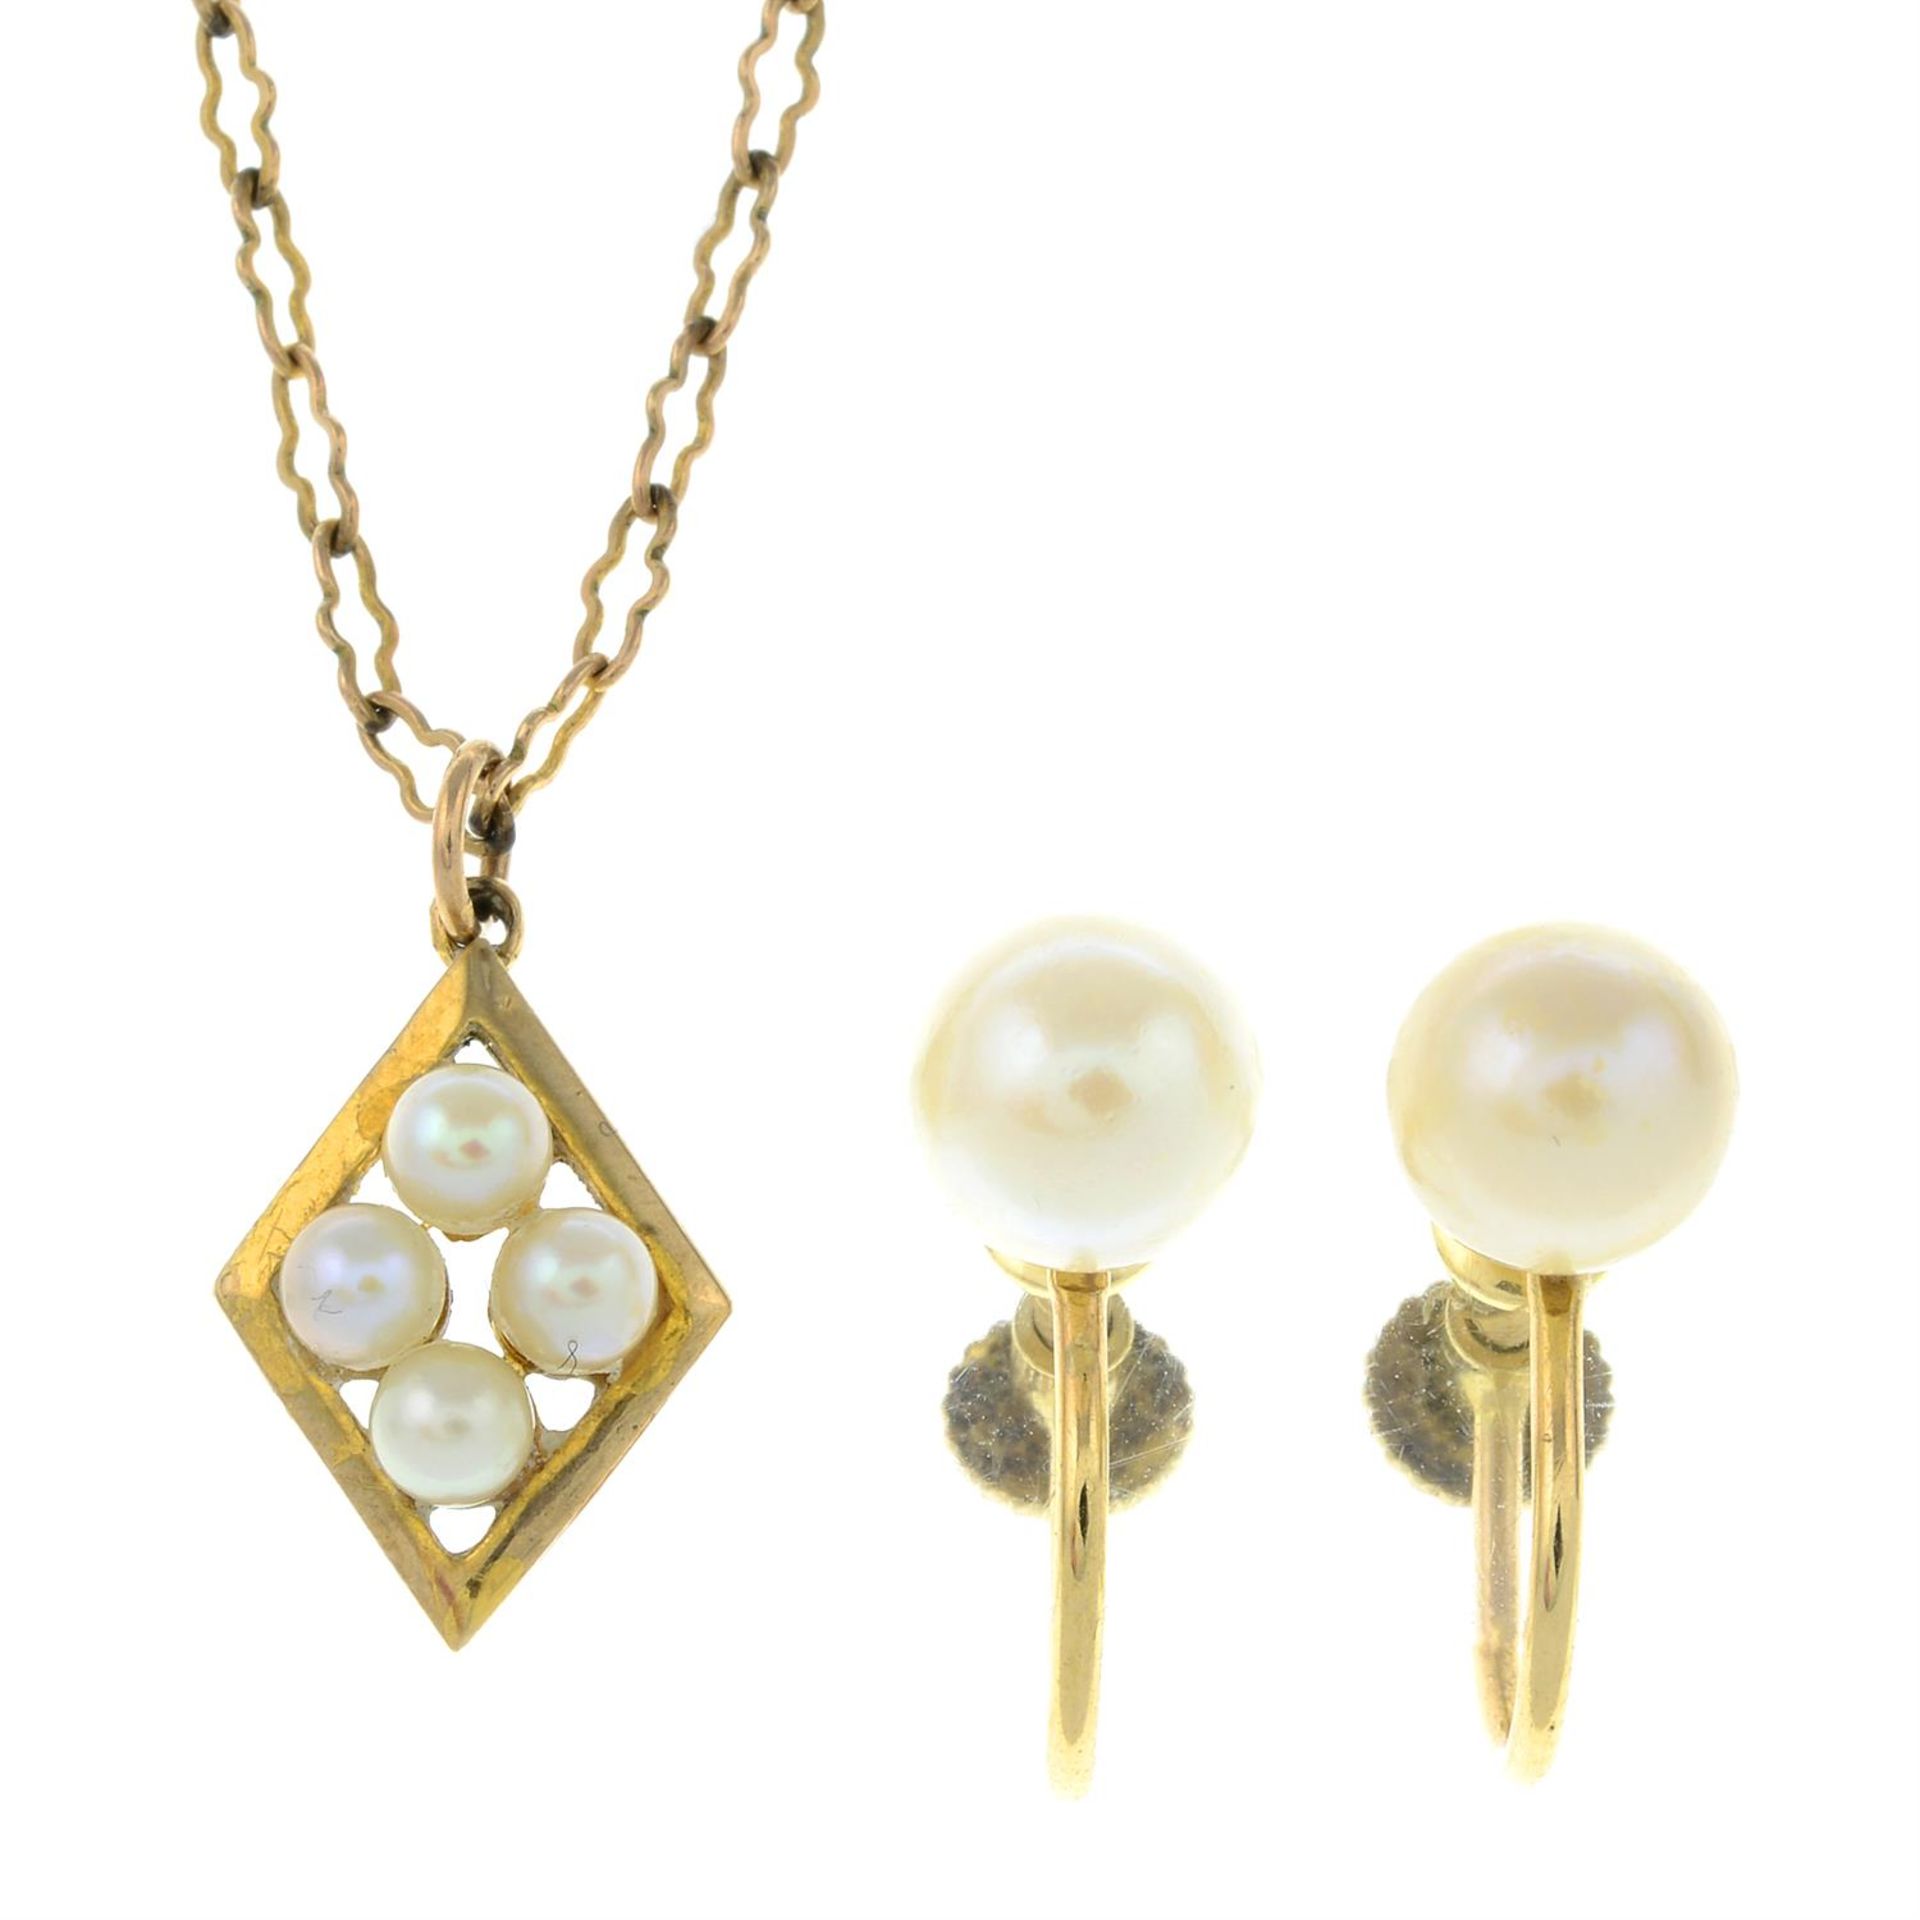 A 9ct gold seed pearl pendant with chain, together with a pair of cultured pearl screw-back